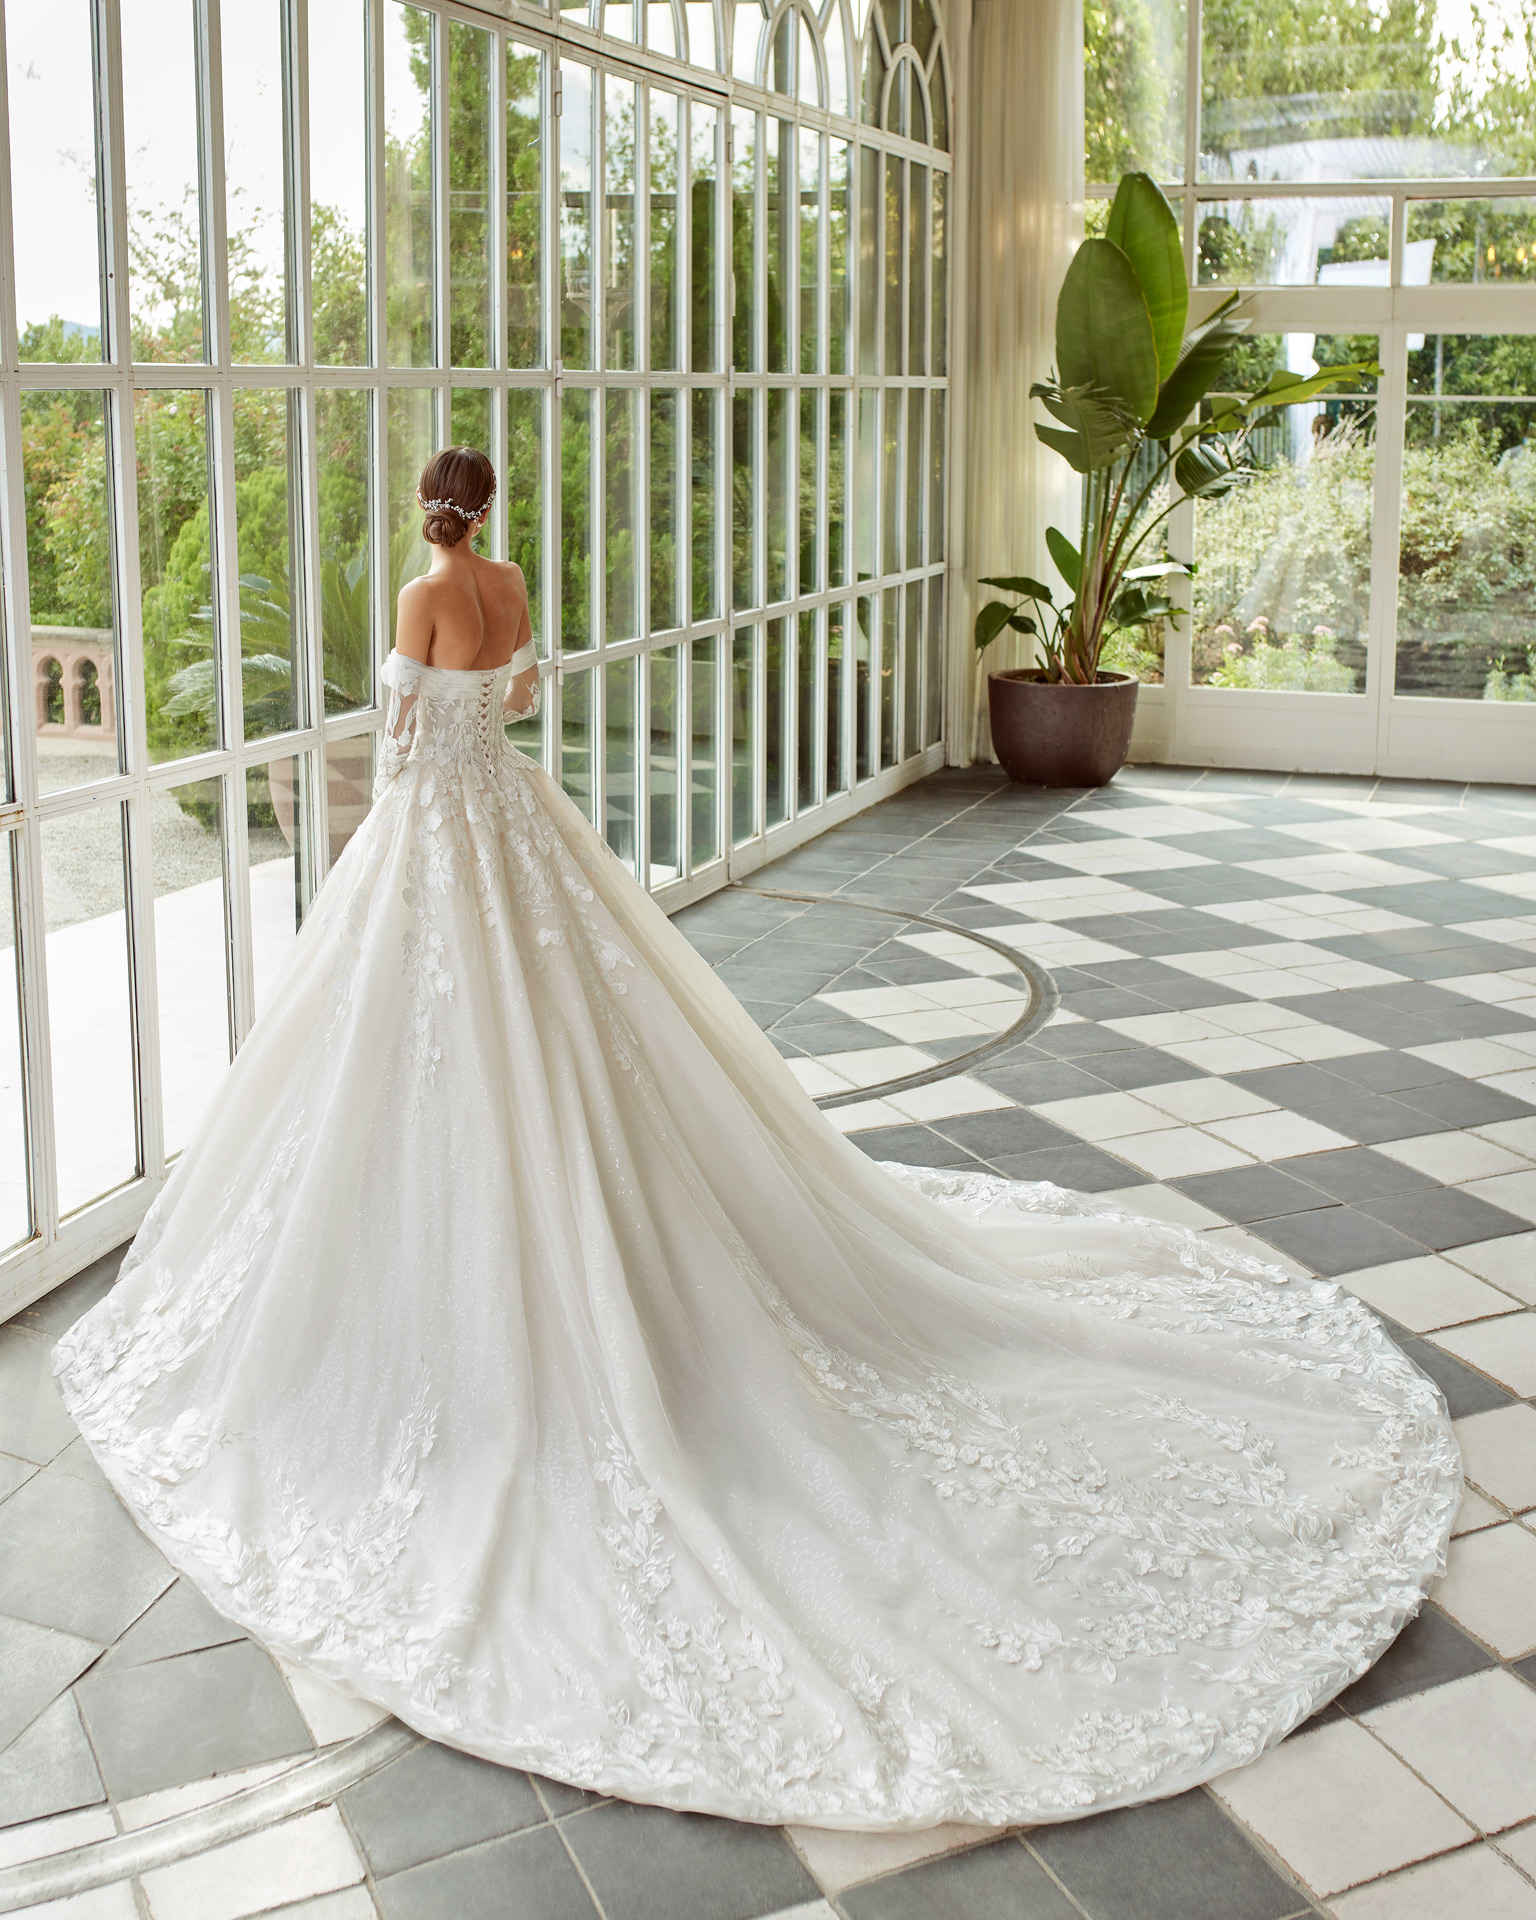 Princess-style wedding dress, with a full sheath-style skirt and shiny mesh; with a sweetheart neckline, a corset back, and long sleeves. Dreamy Luna Studio design made of tulle and lace, with beadwork finishes. LUNA_NOVIAS.